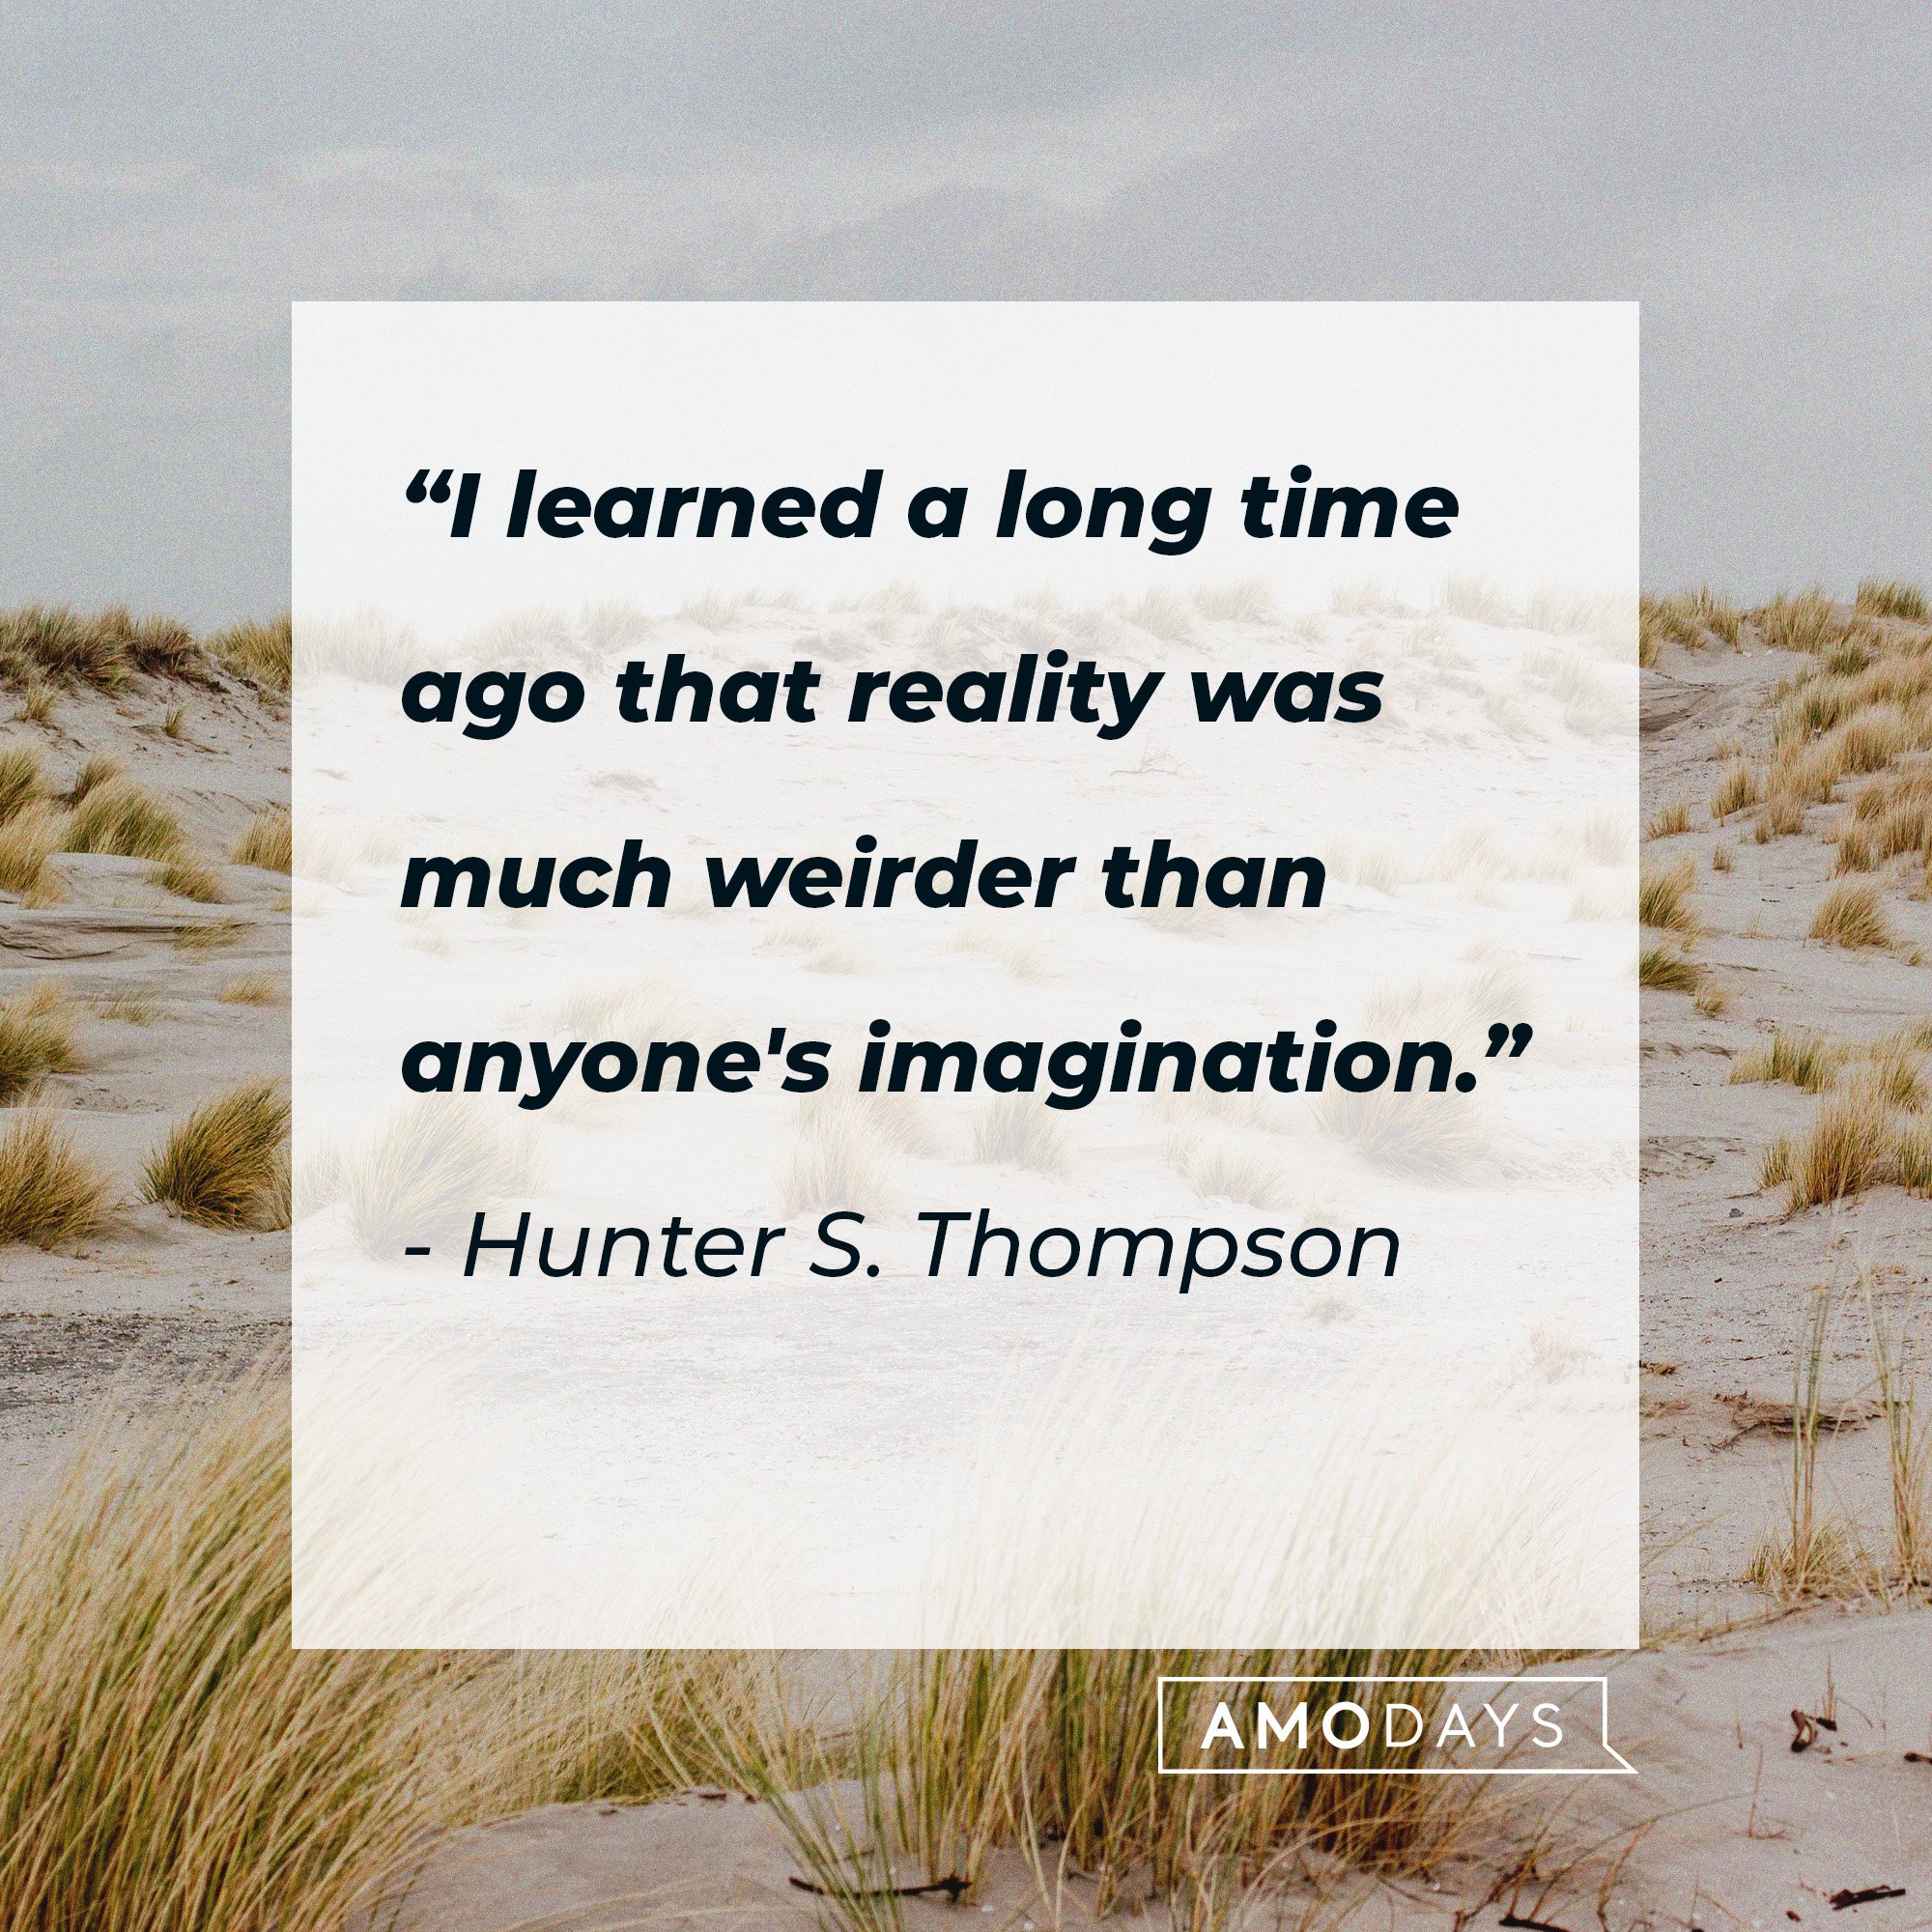 Hunter S. Thompson’s quote: “I learned a long time ago that reality was much weirder than anyone's imagination.” | Image: AmoDays